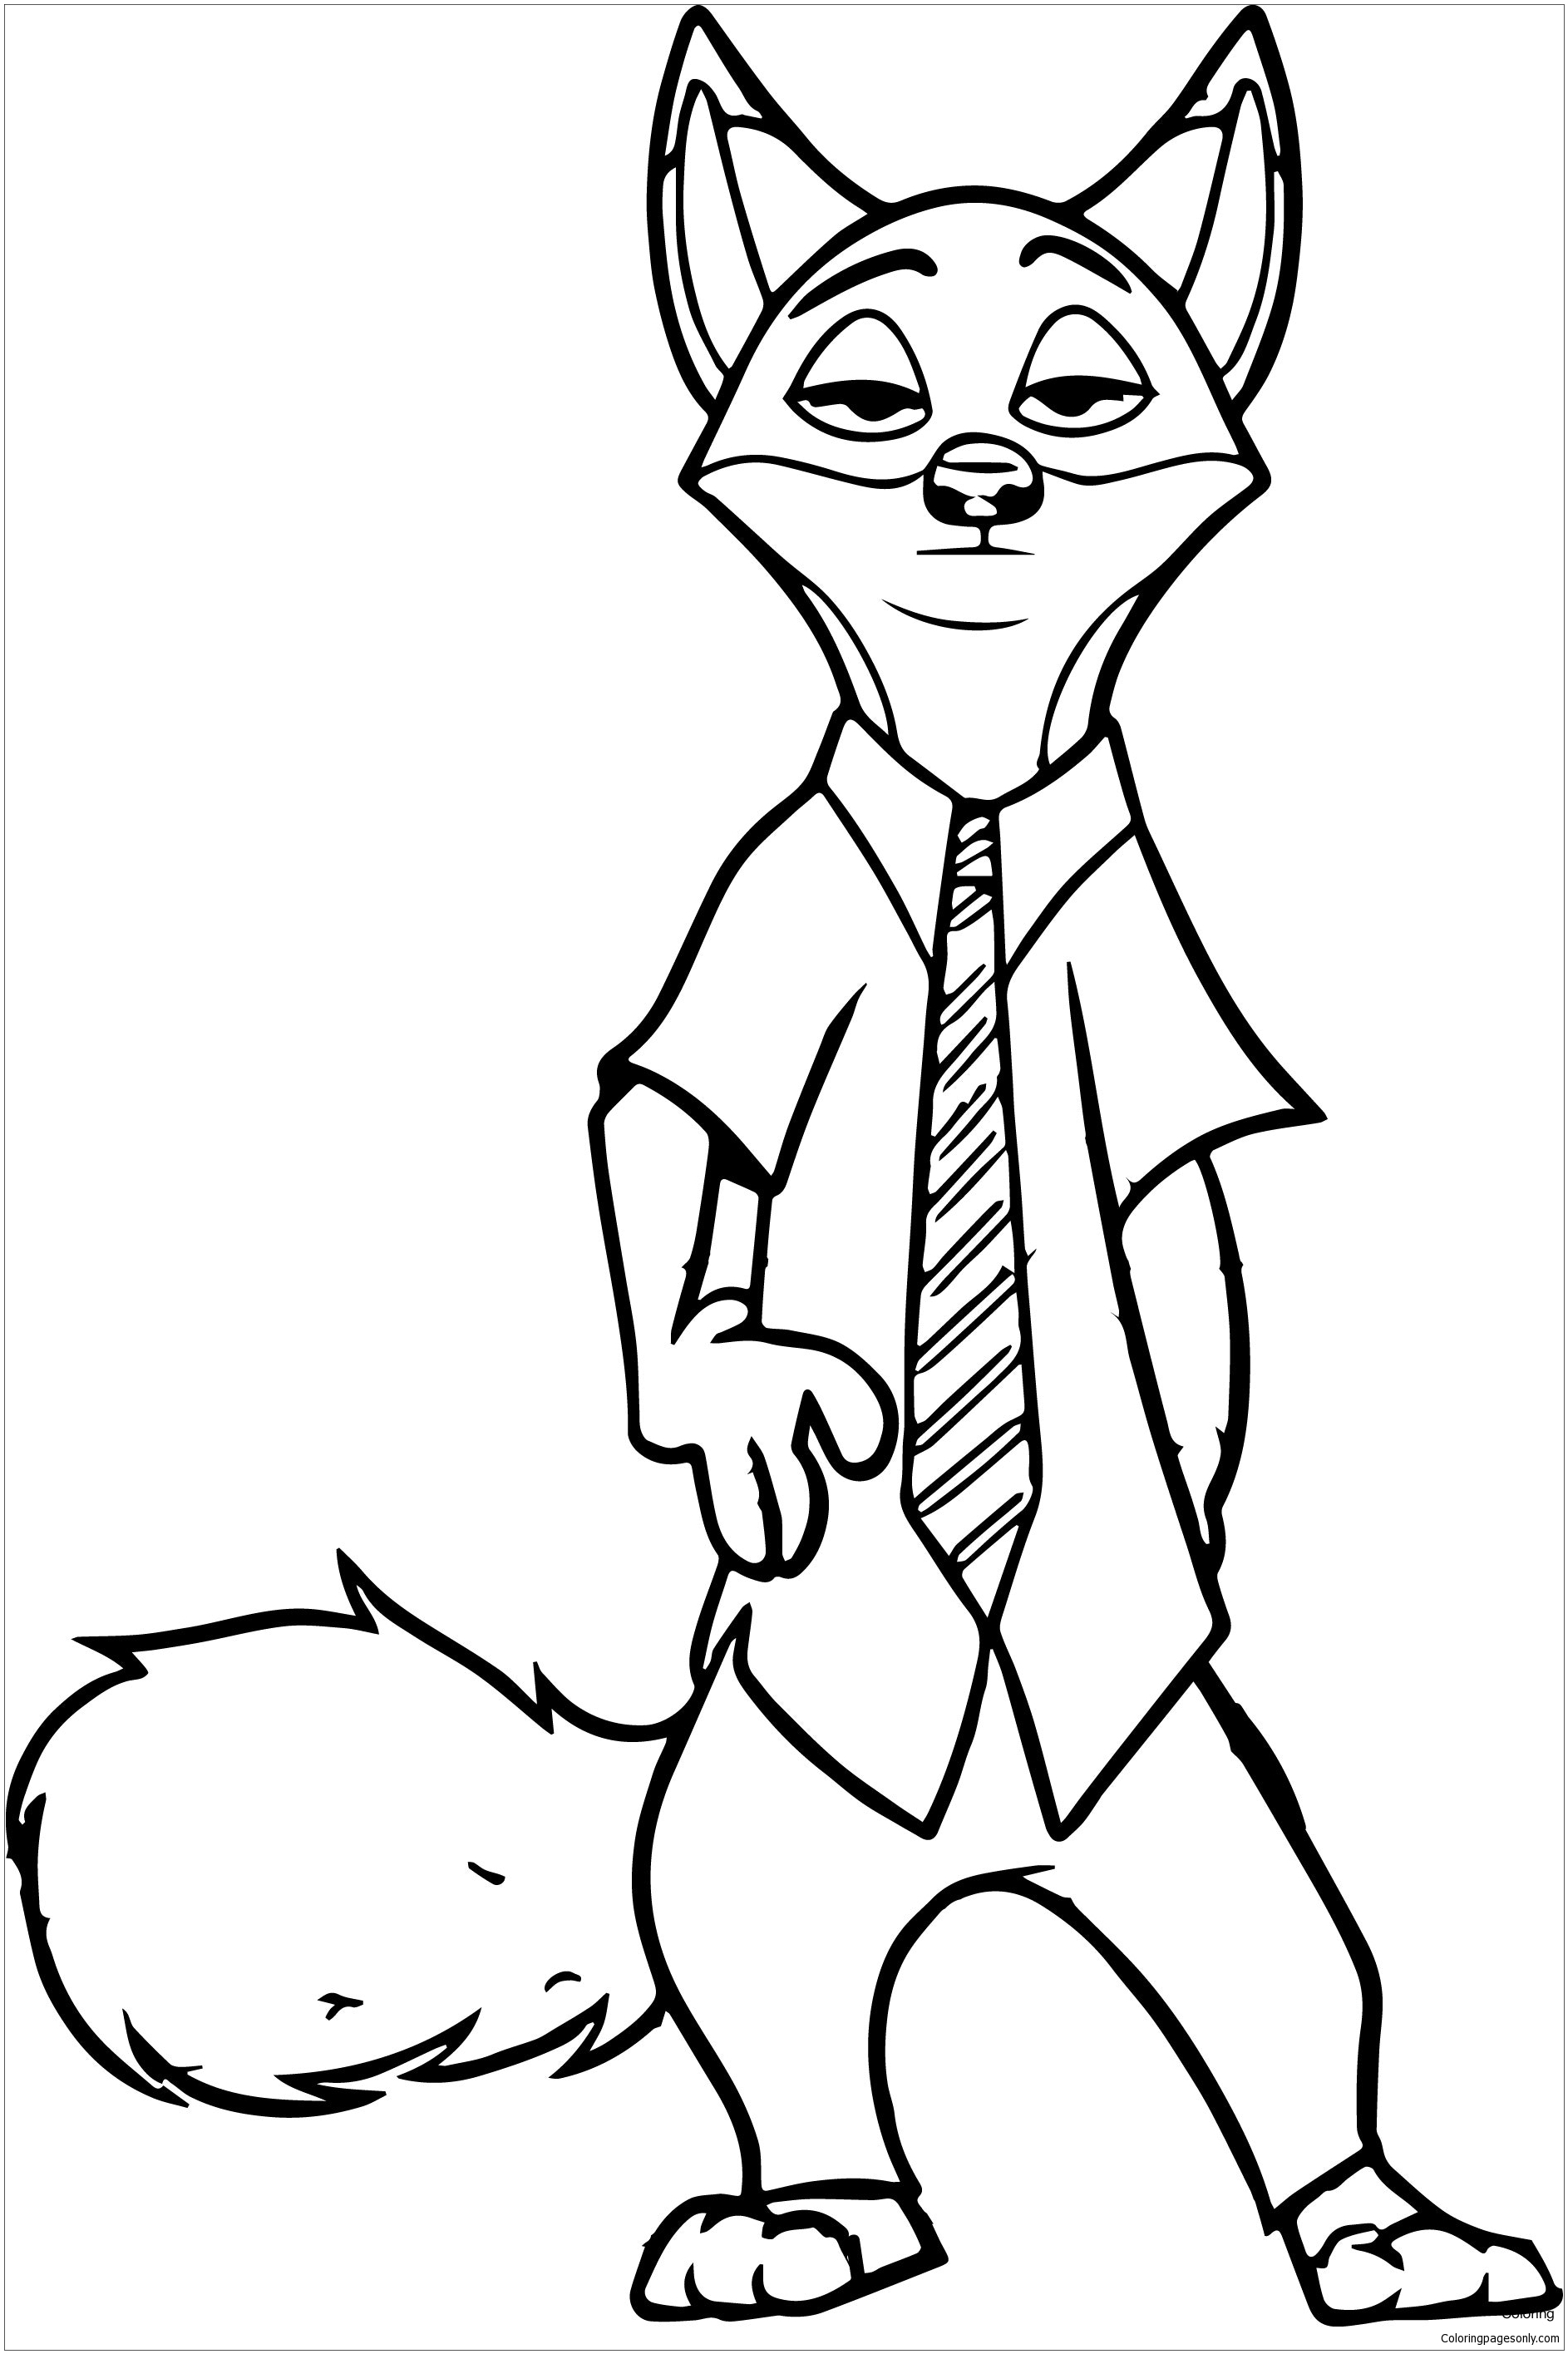 Nick Wilde From Zootopia 1 Coloring Page